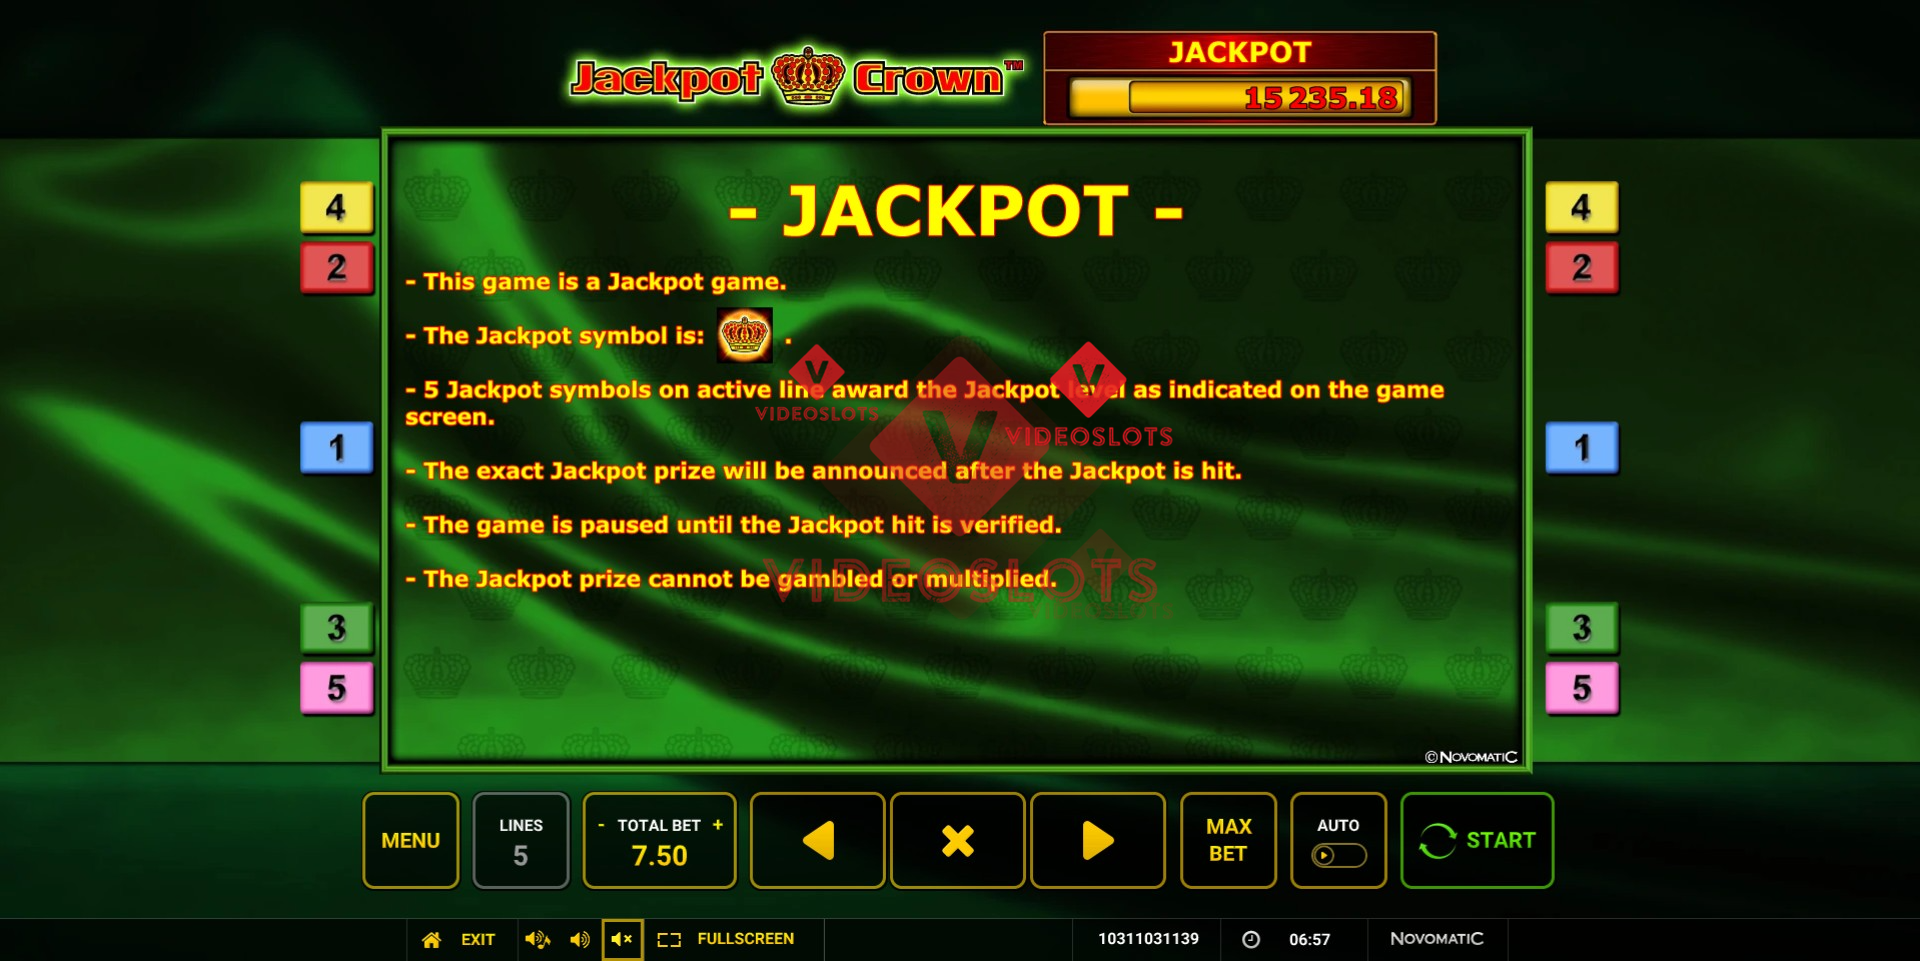 Pay Table for Jackpot Crown slot from Greentube